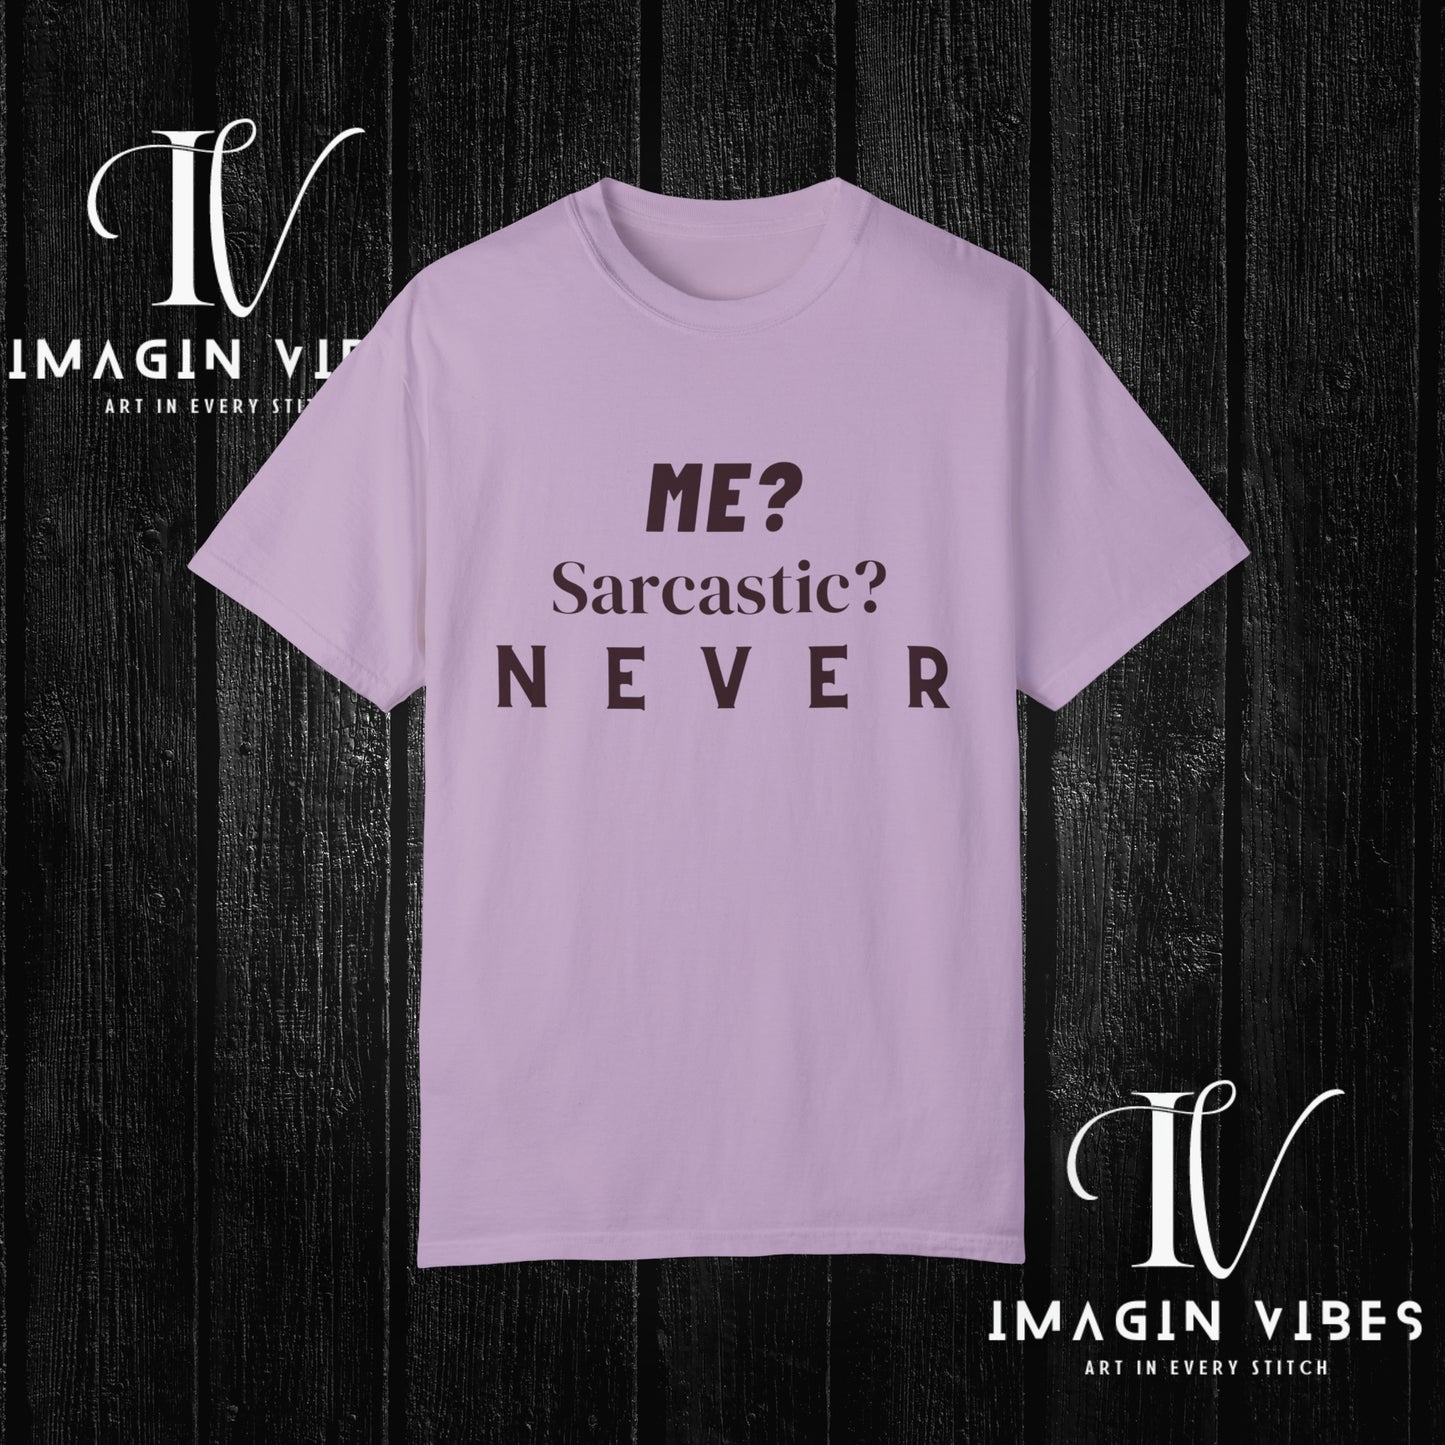 Me? Sarcastic? Never T-Shirt - Unisex Tee - Funny Sarcastic Shirt T-Shirt Orchid S 